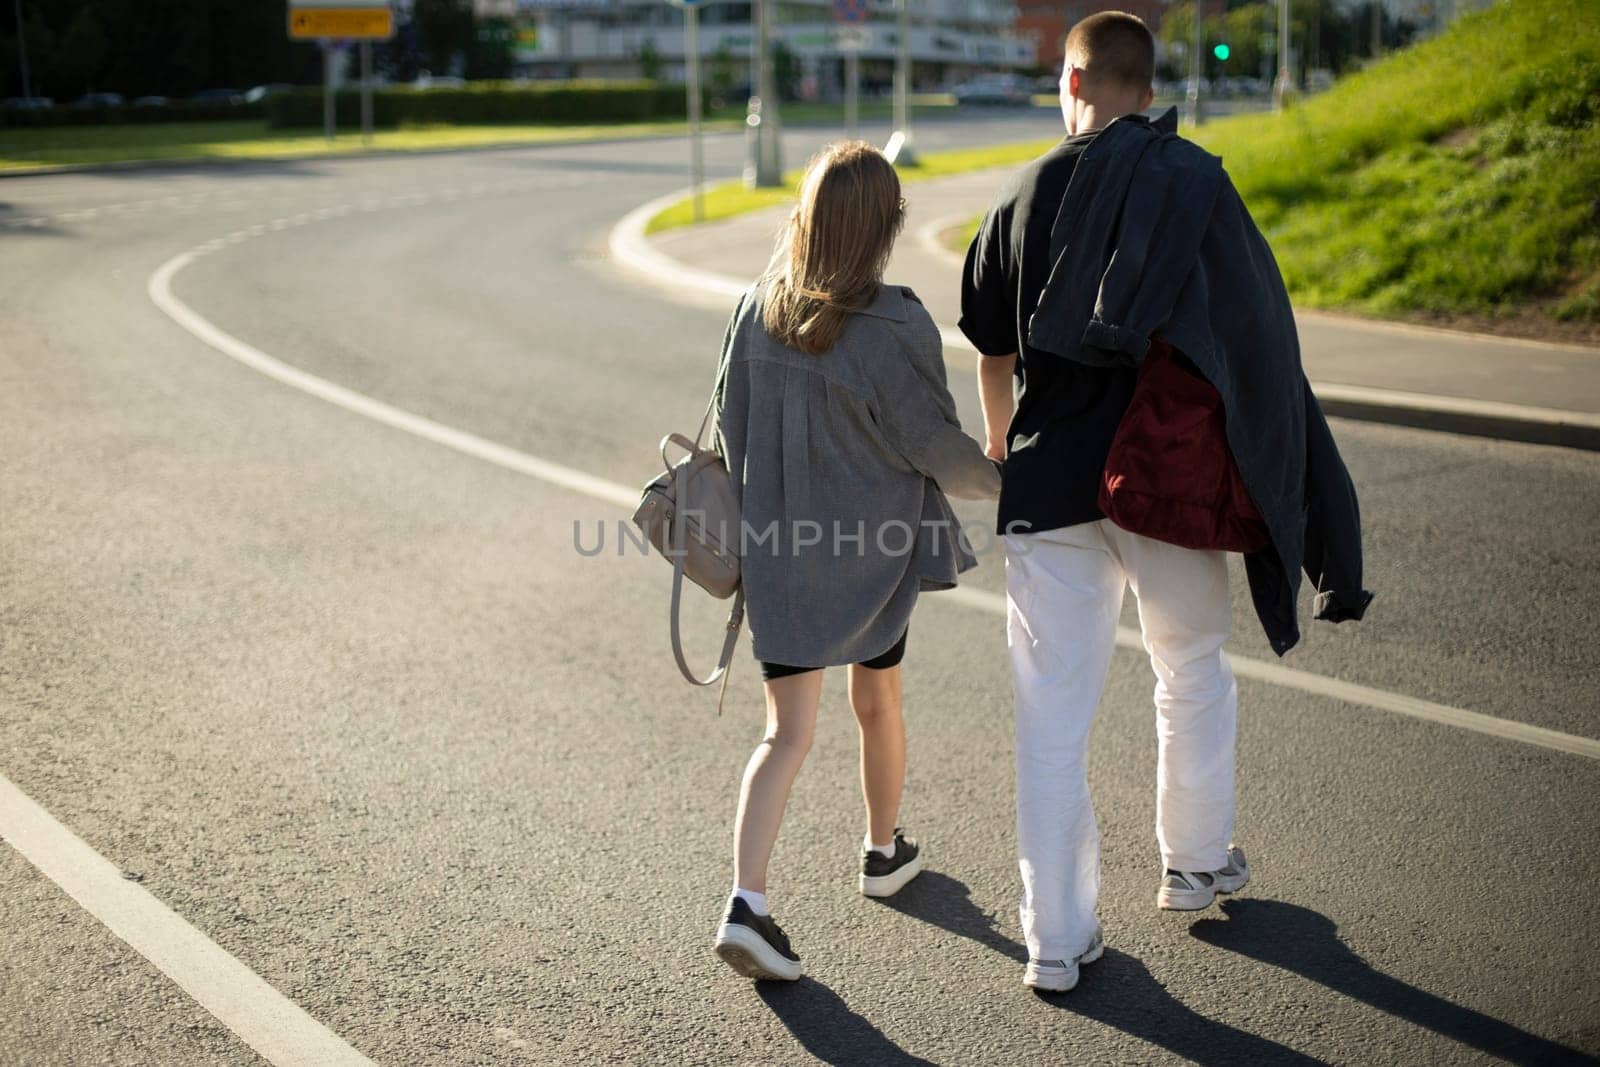 Guy and girl cross road. People are walking on road. People in city in summer. Couple in love on street.